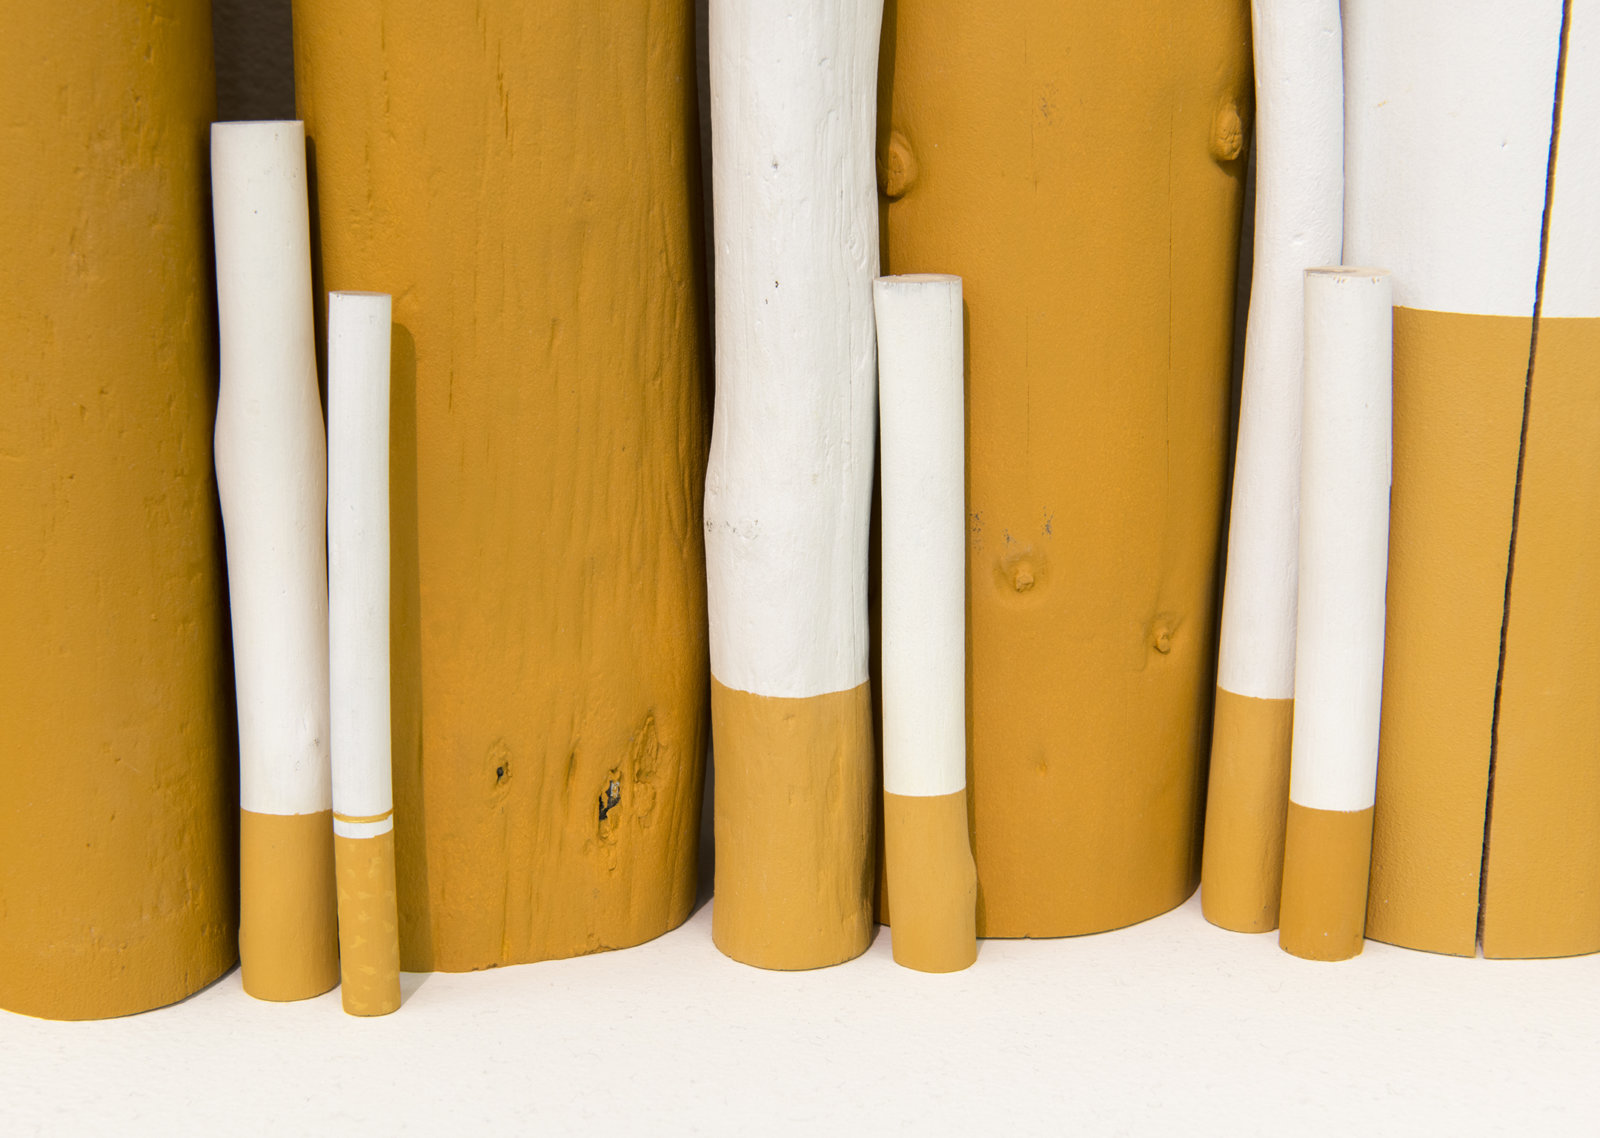 Liz Magor, The Rules (detail), 2012, wood, paint, 38 x 180 x 10 in. (97 x 457 x 25 cm)